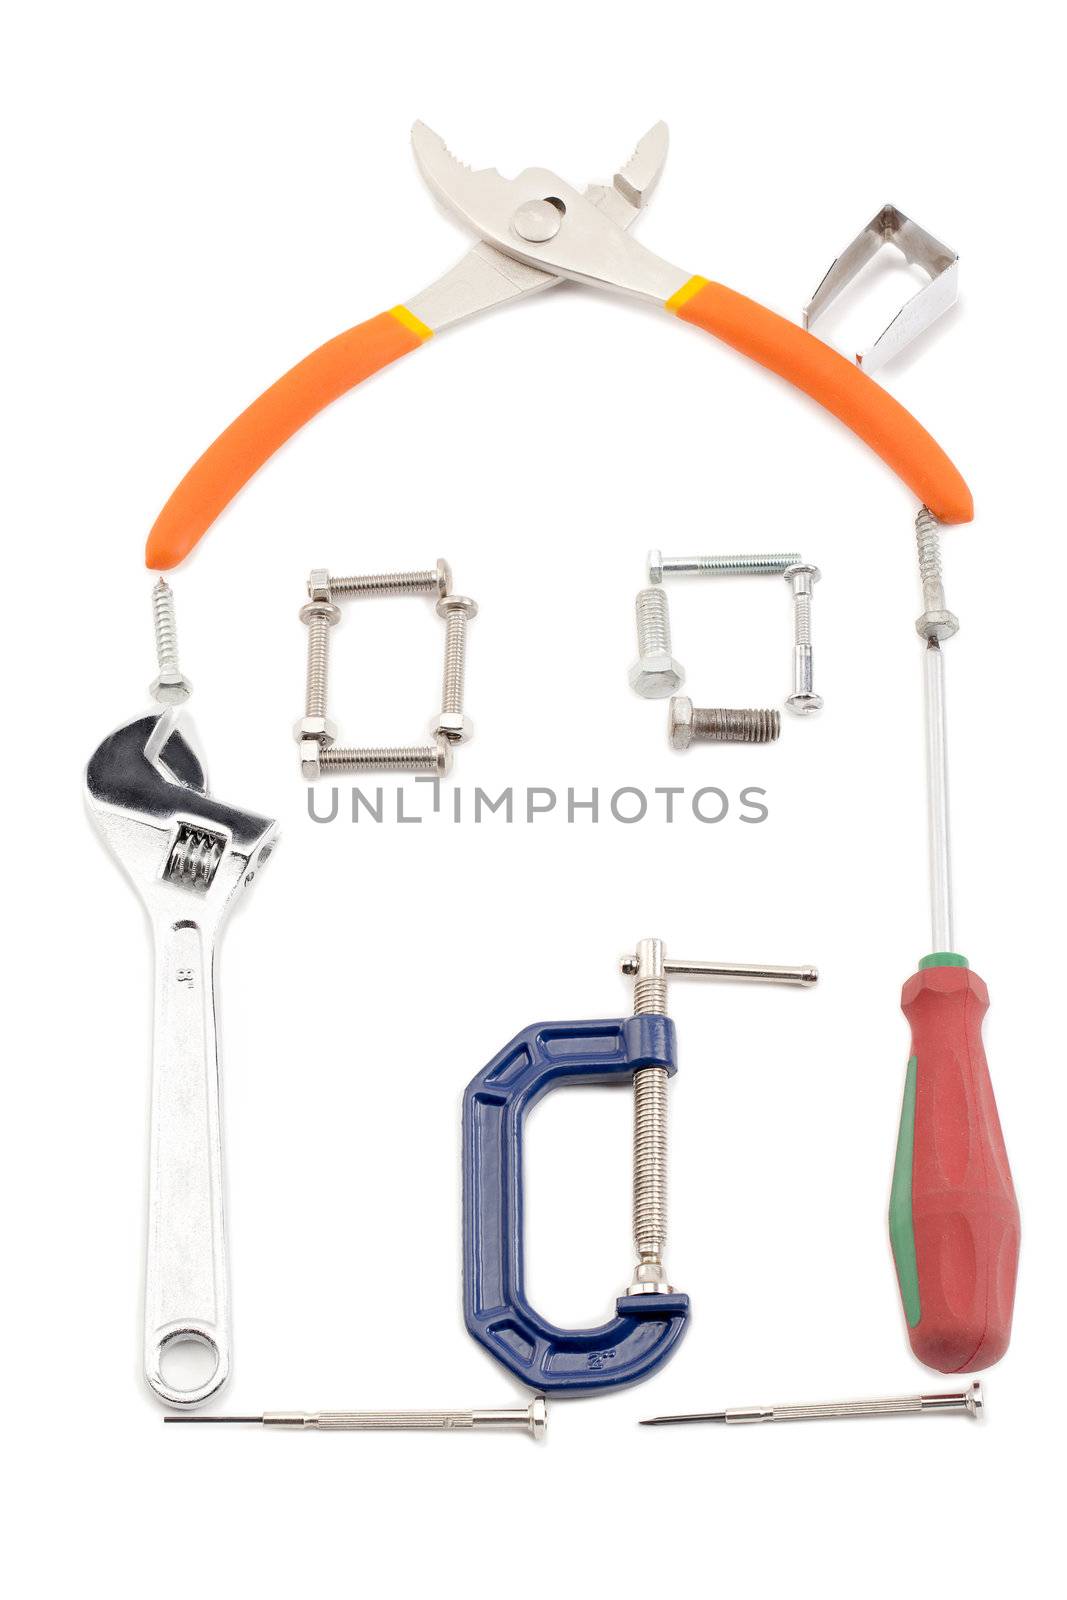 Image of tools forming an image of an house isolated on white background